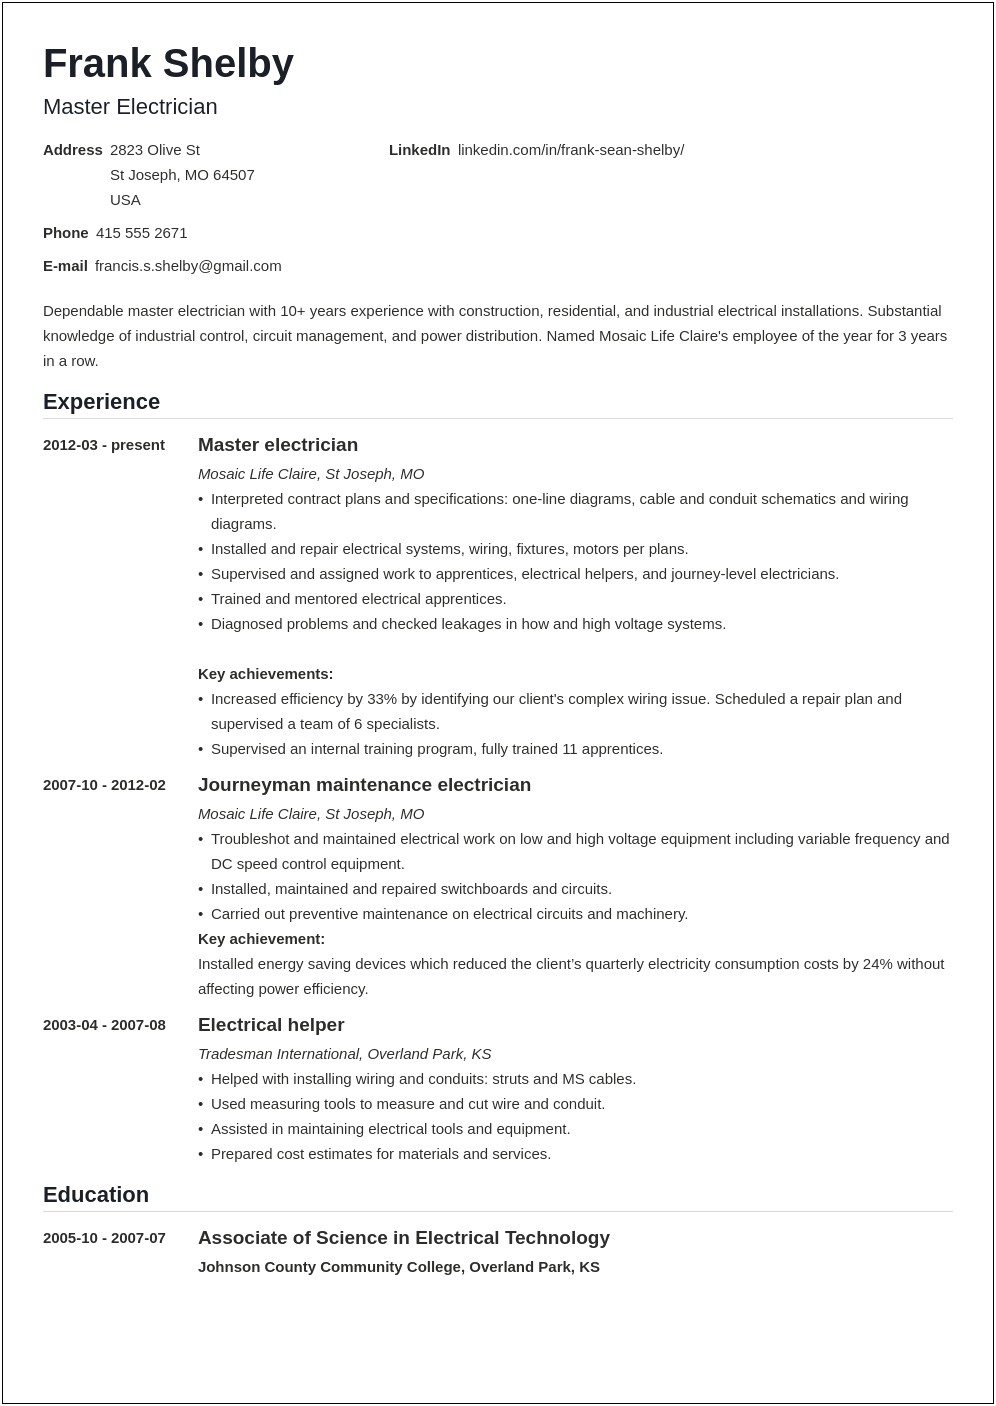 Job Summary For Resume Examples For Apprentice